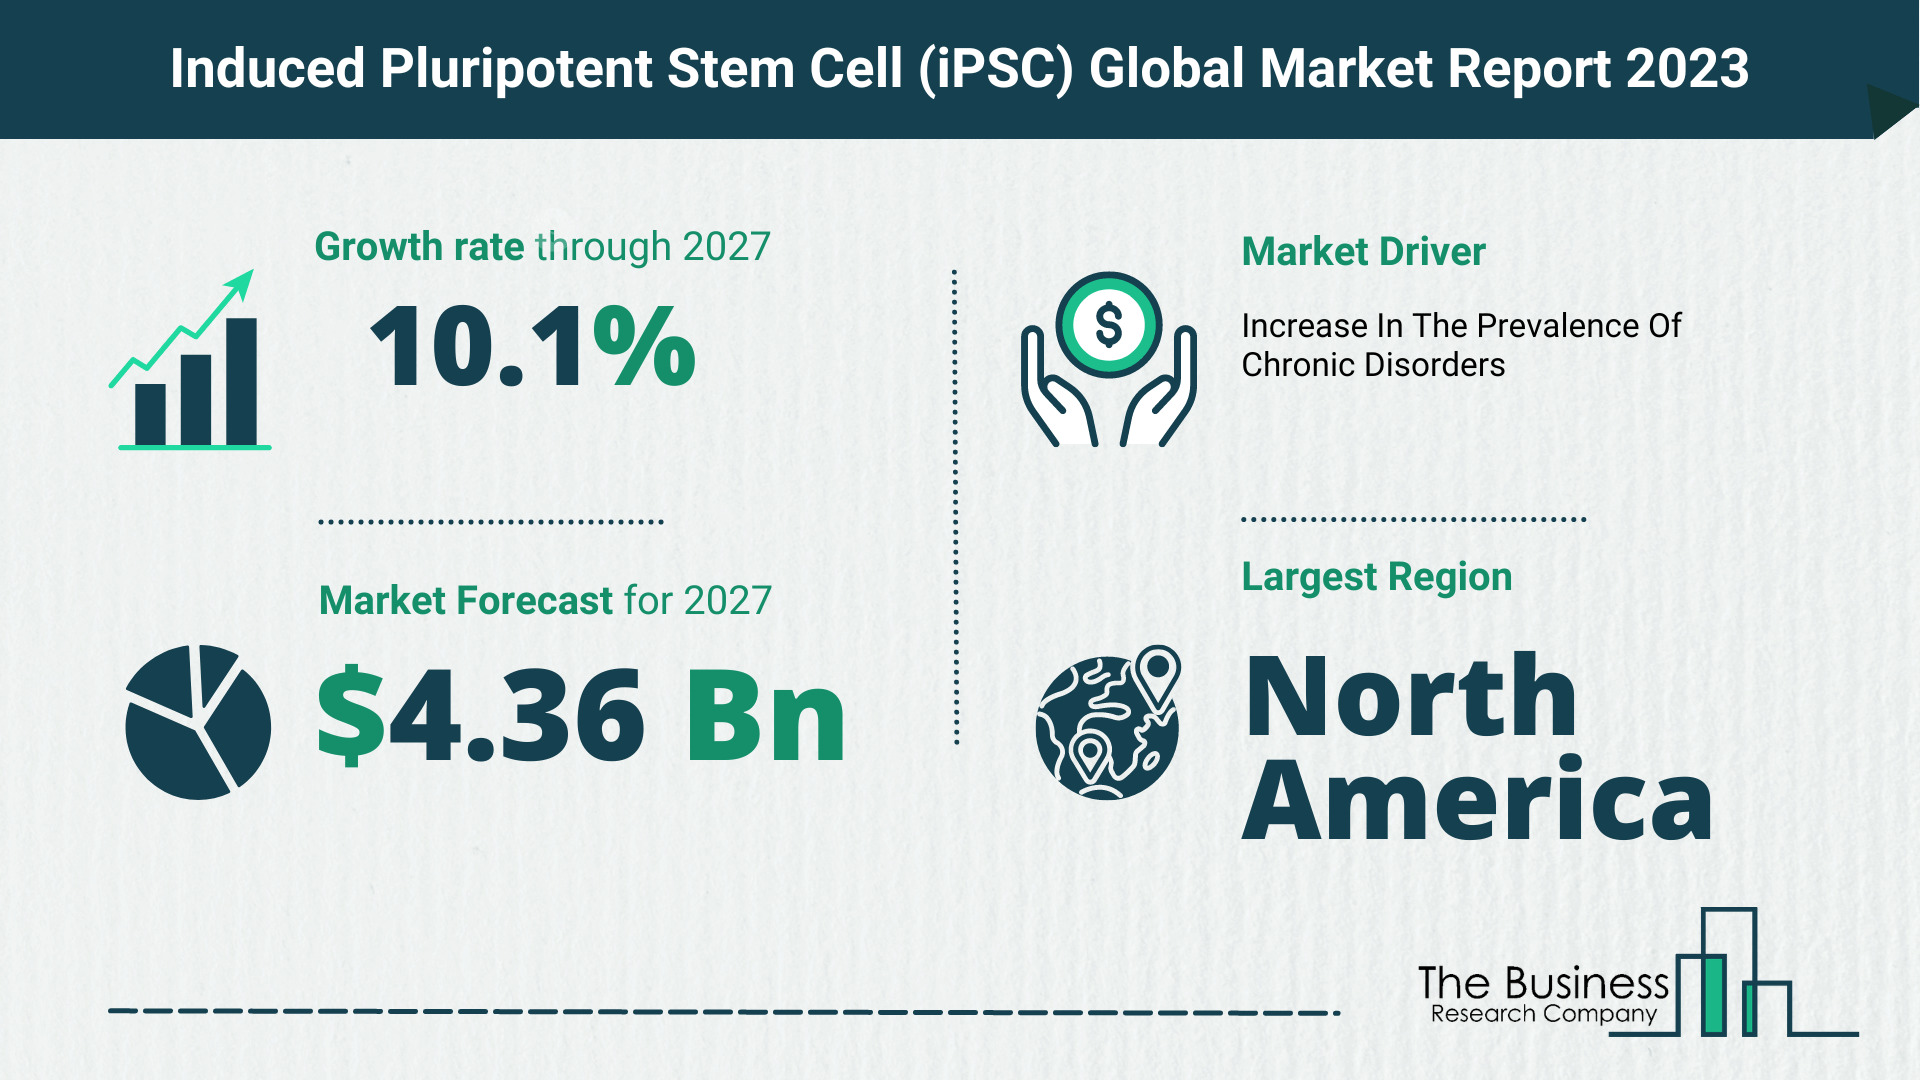 Global Induced Pluripotent Stem Cell (iPSC) Market Opportunities And Strategies 2023